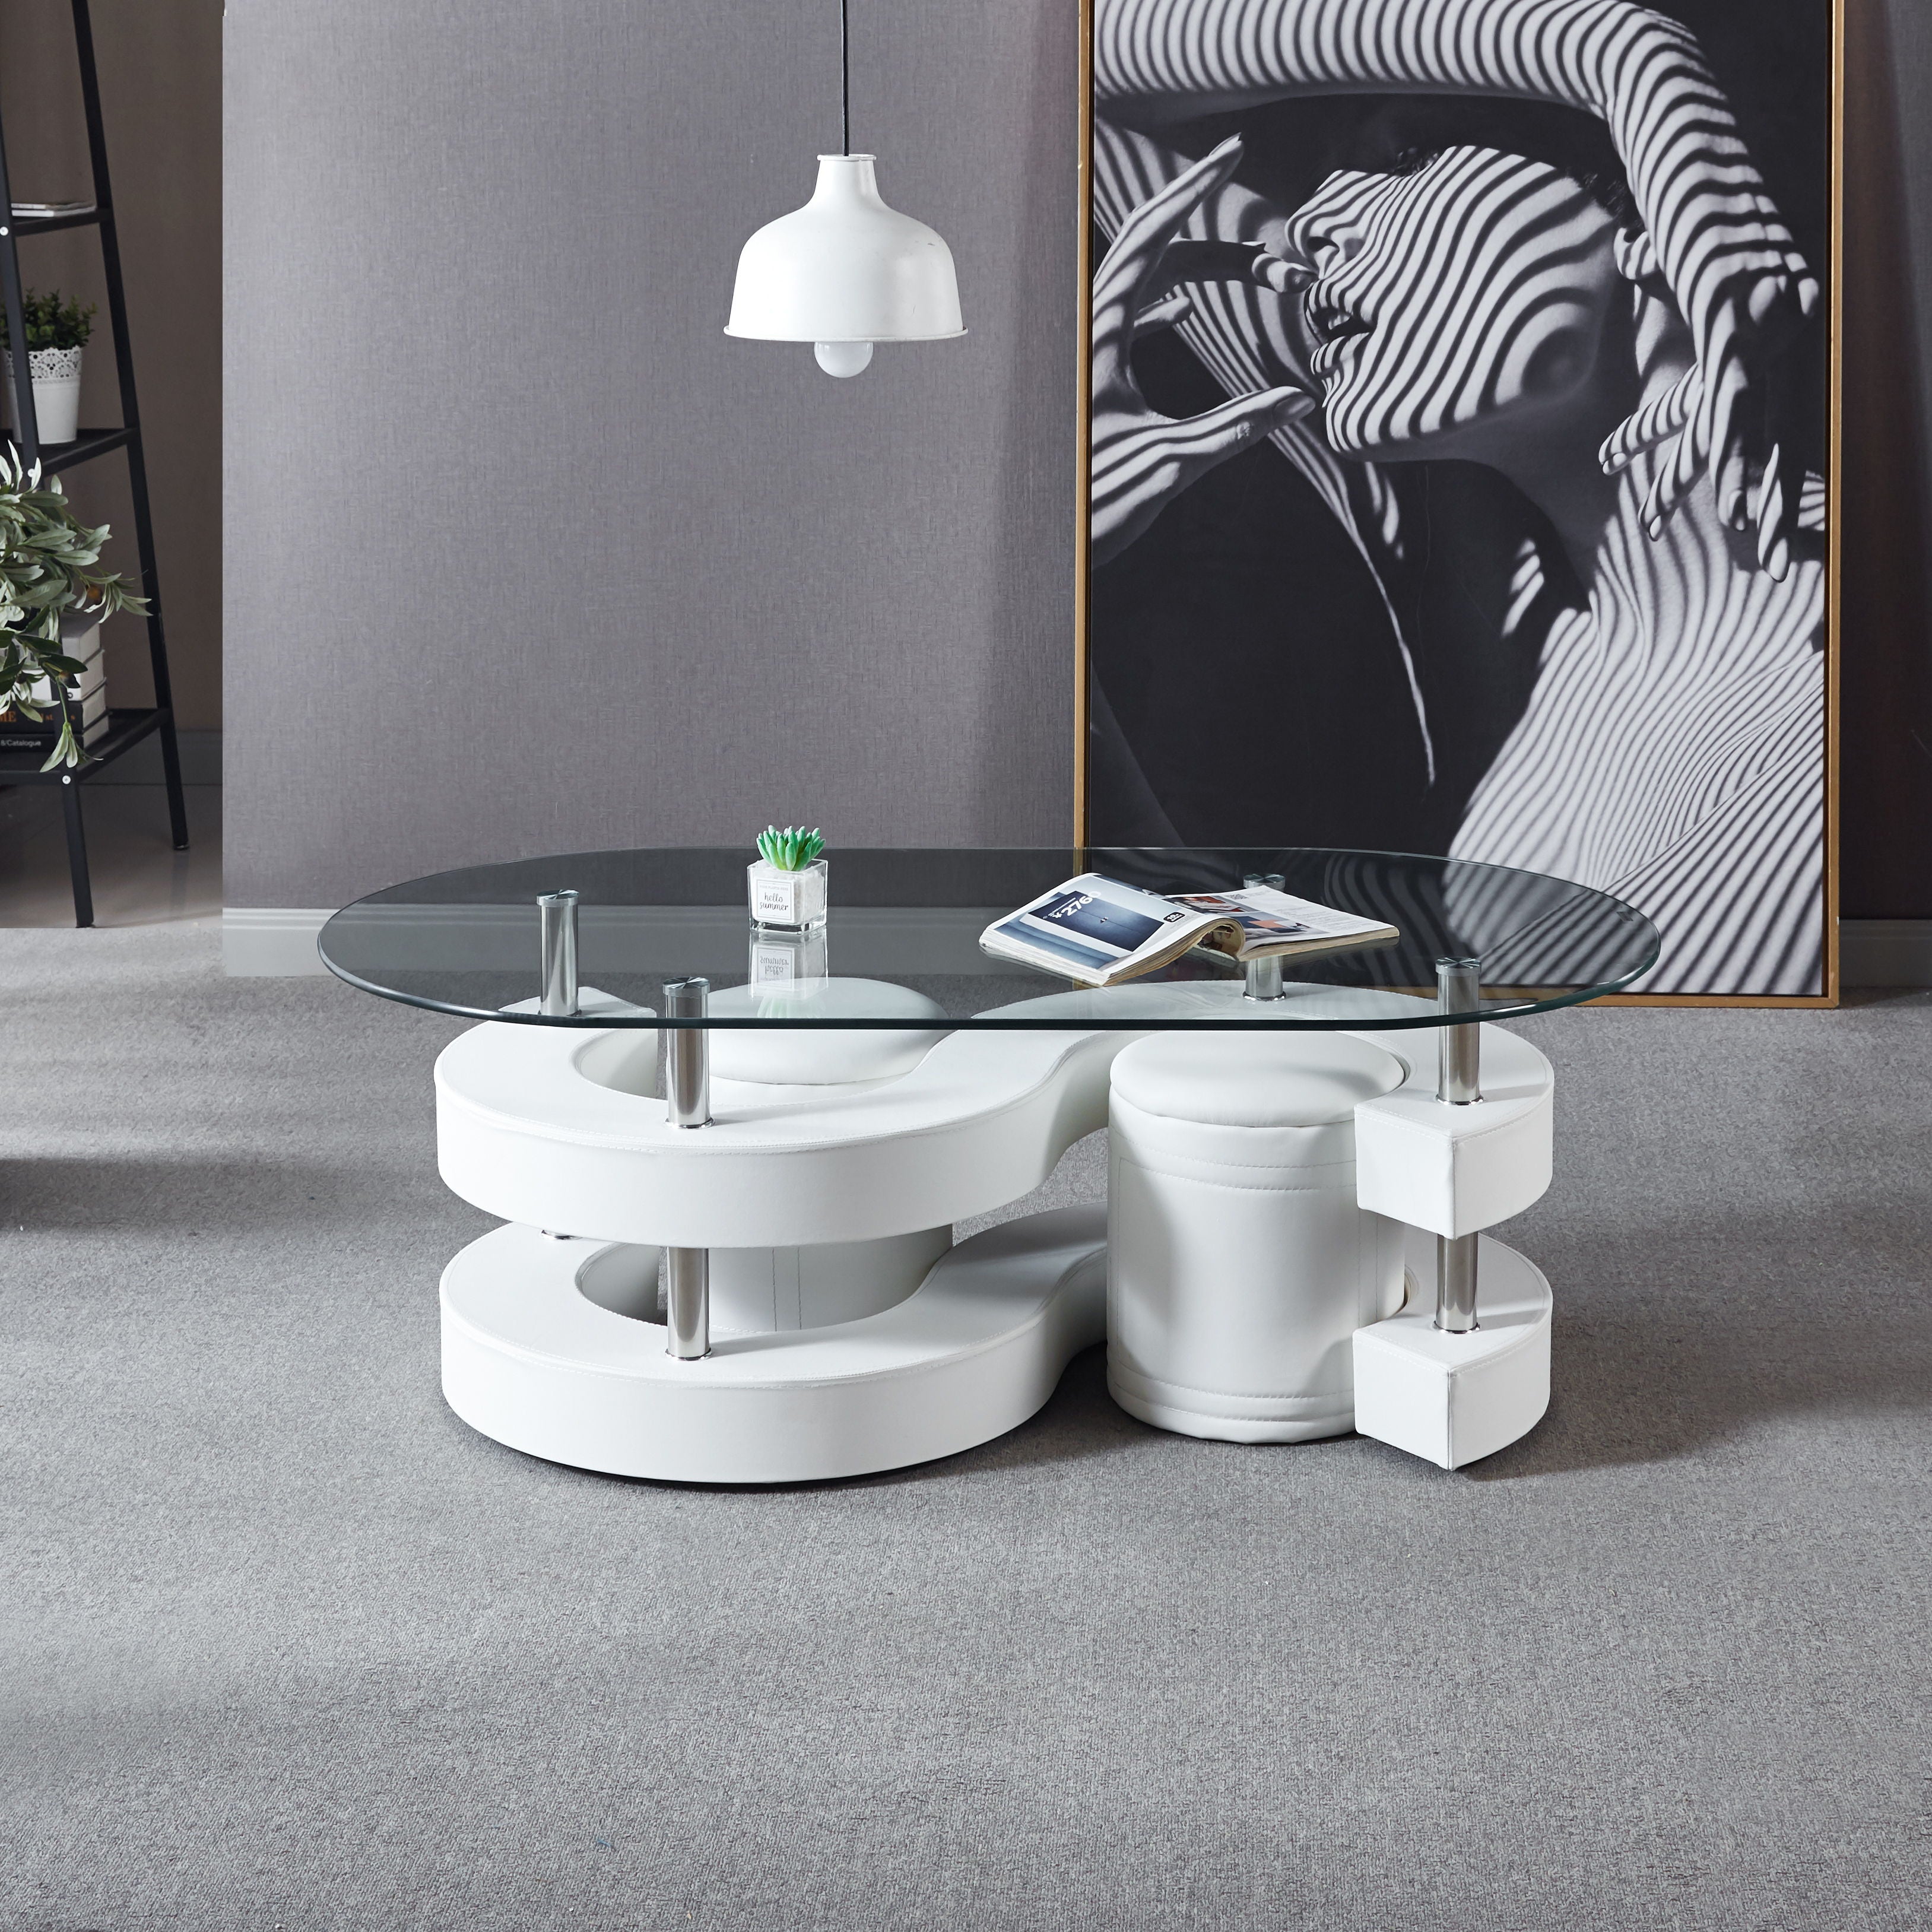 3 Pieces Coffee Table Set, Oval 10Mm / 0.39" Thick Tempered Glass Table And 2 Leather Stools - White